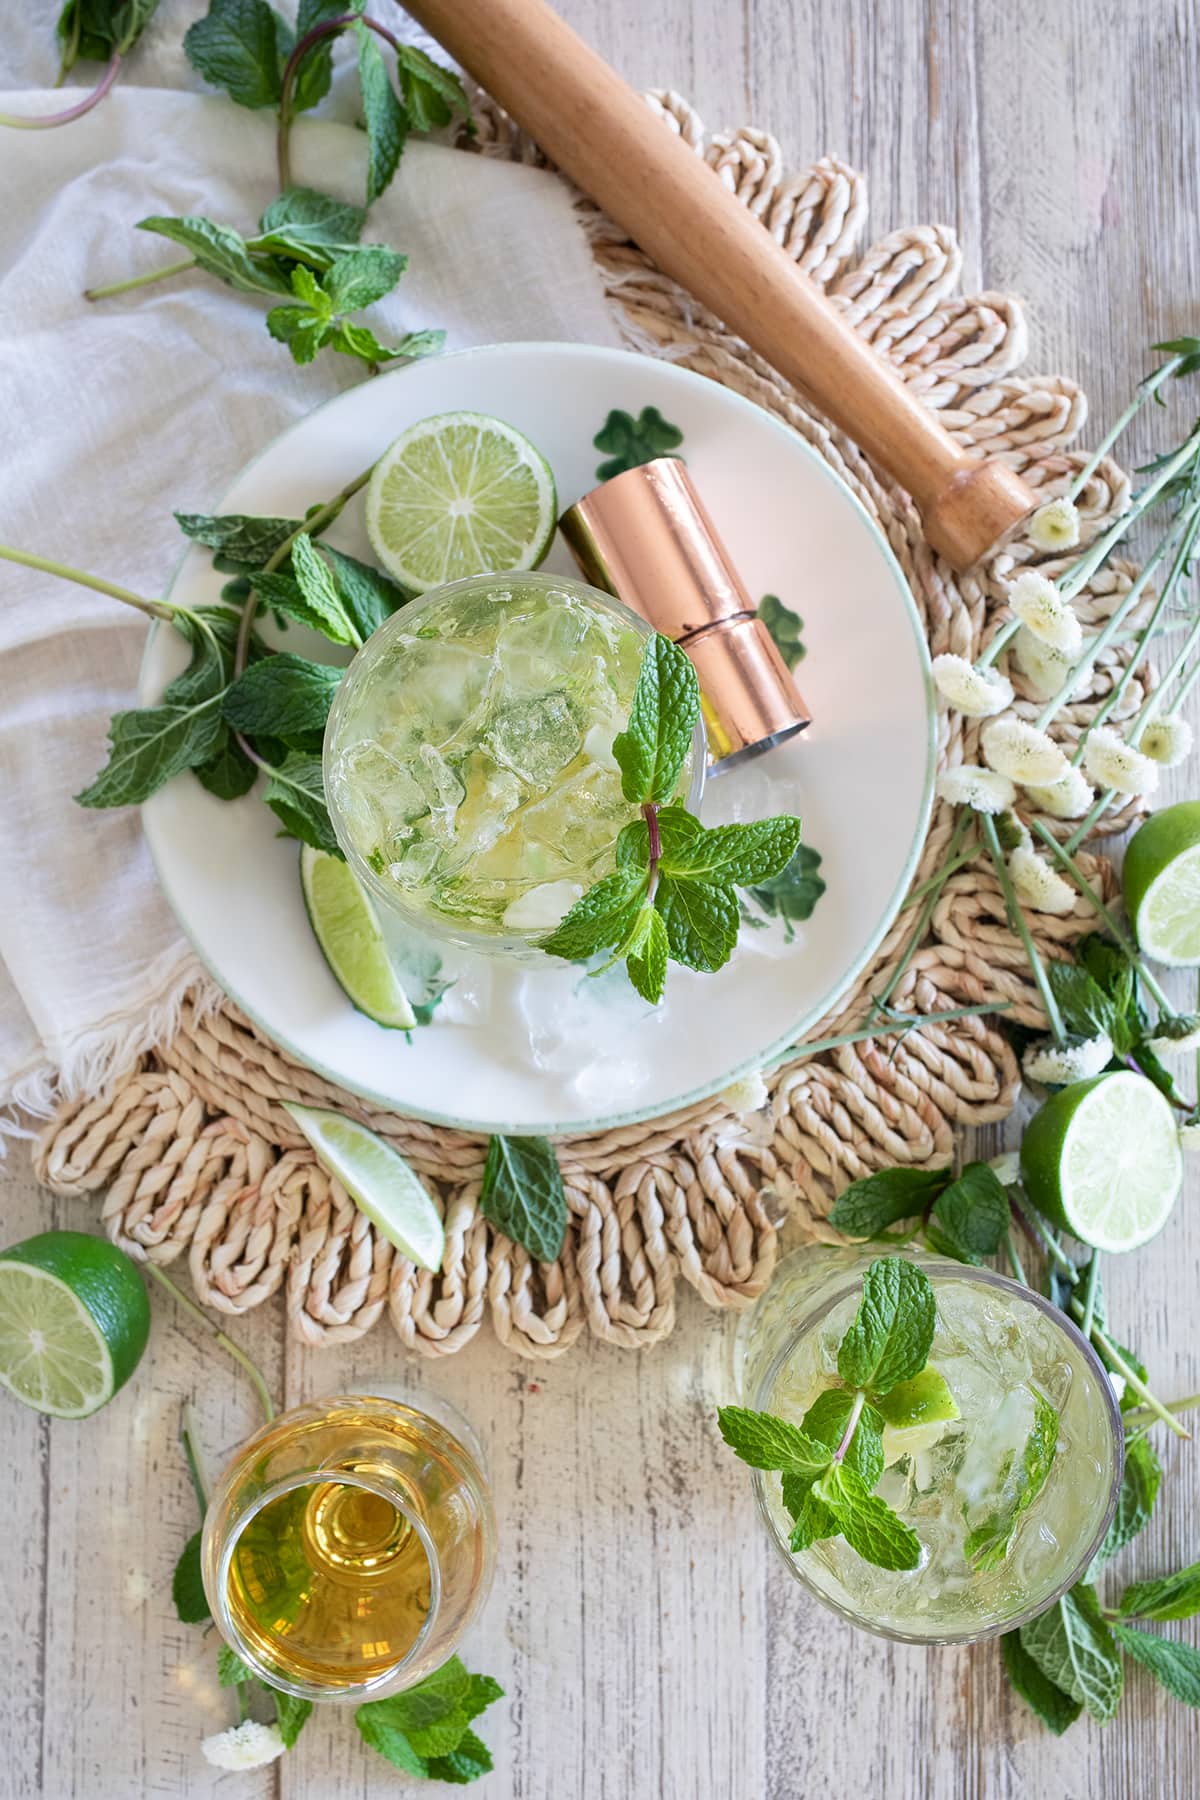 Irish Mint Mojitos are the perfect St. Patrick's Day cocktail made with Irish Whiskey, Mint Simple Syrup, muddled mint and limes and topped with club soda. #stpatricksday #mojito #whiskeycocktail #irishmojito